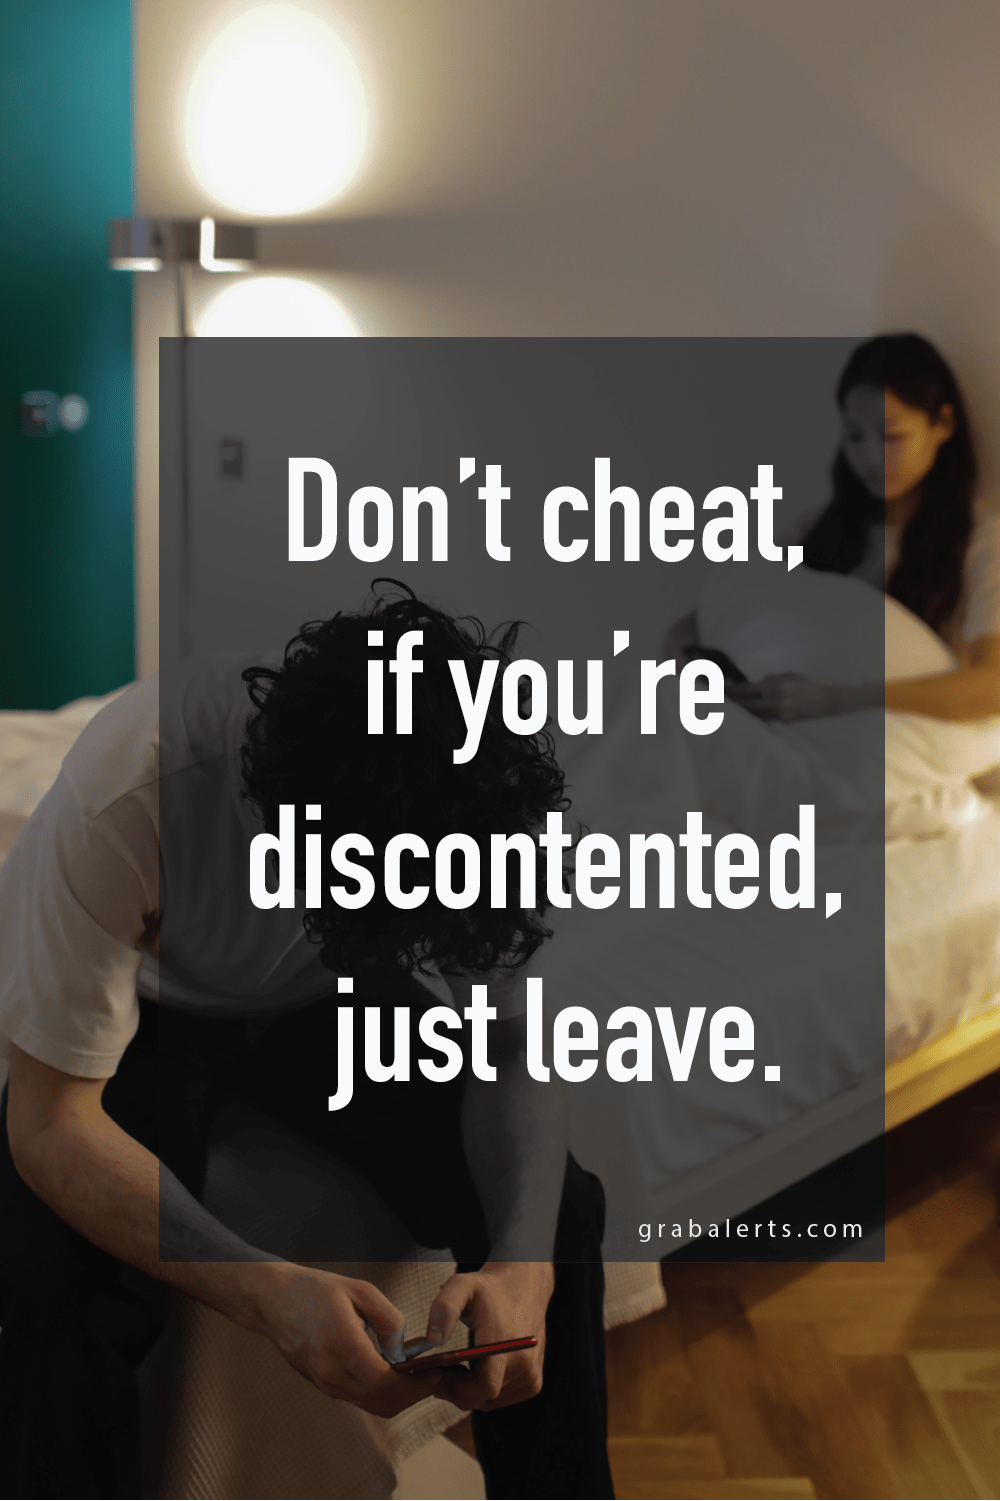 100 Quotes about Cheating Boyfriend - Inspirational and Funny